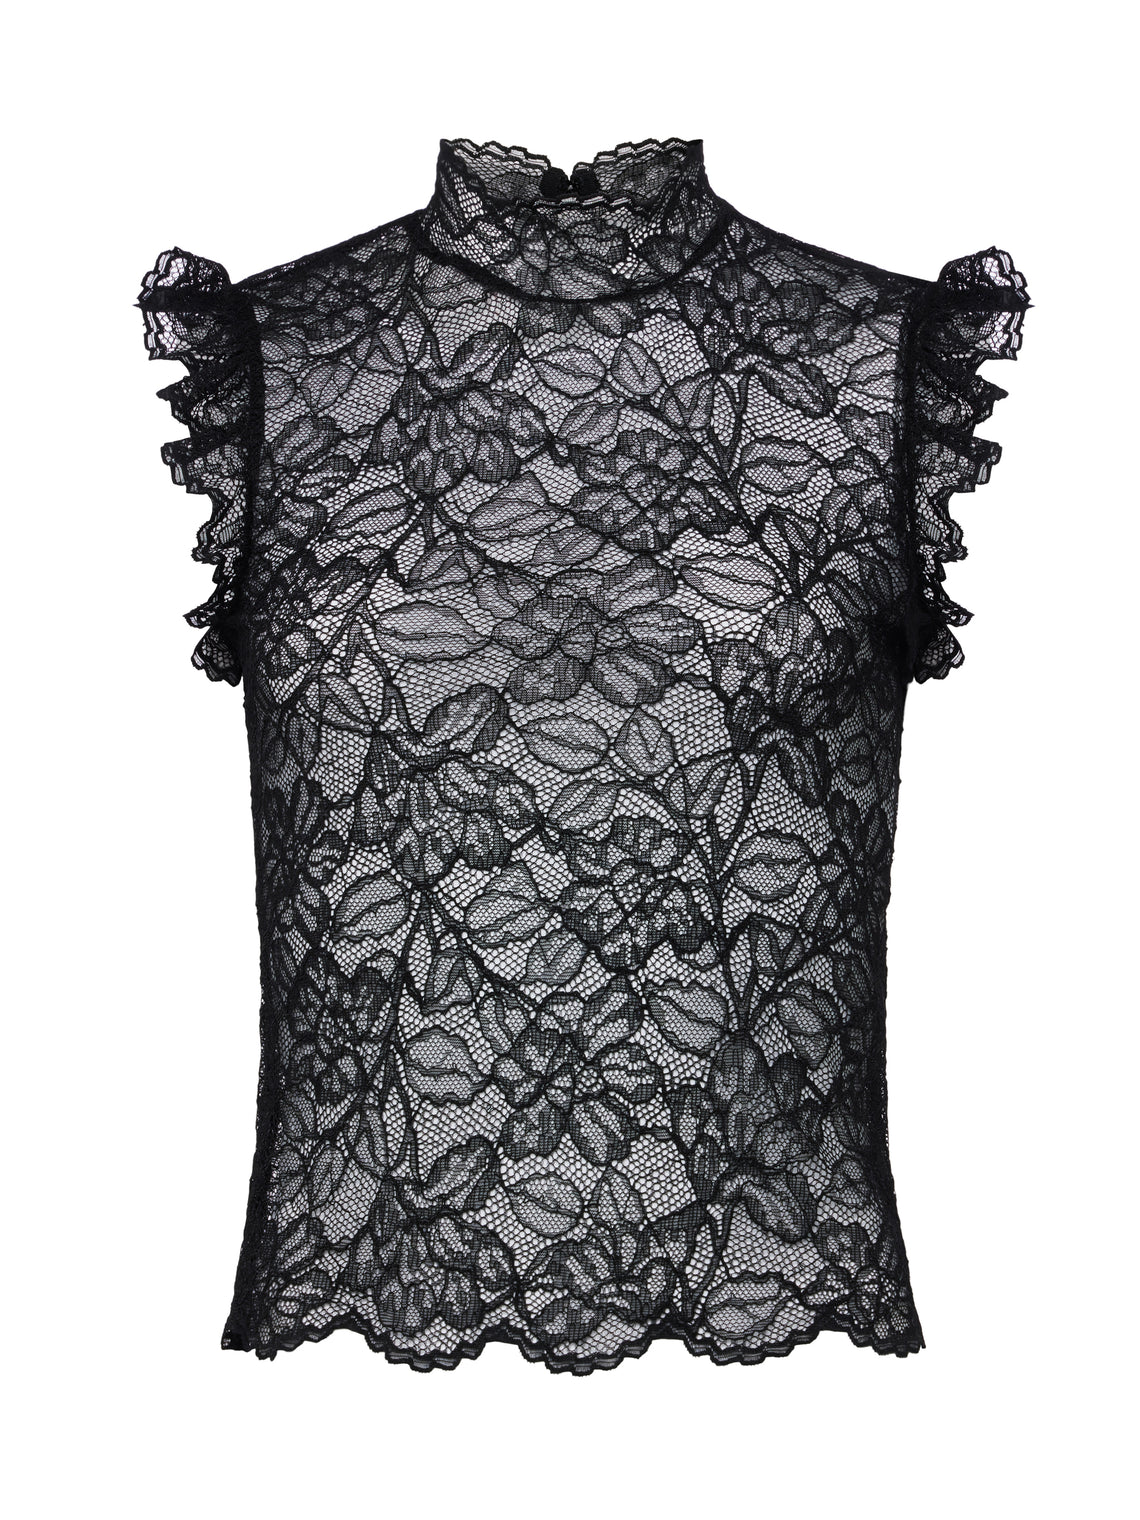 L'AGENCE Kaila Lace Top in Black